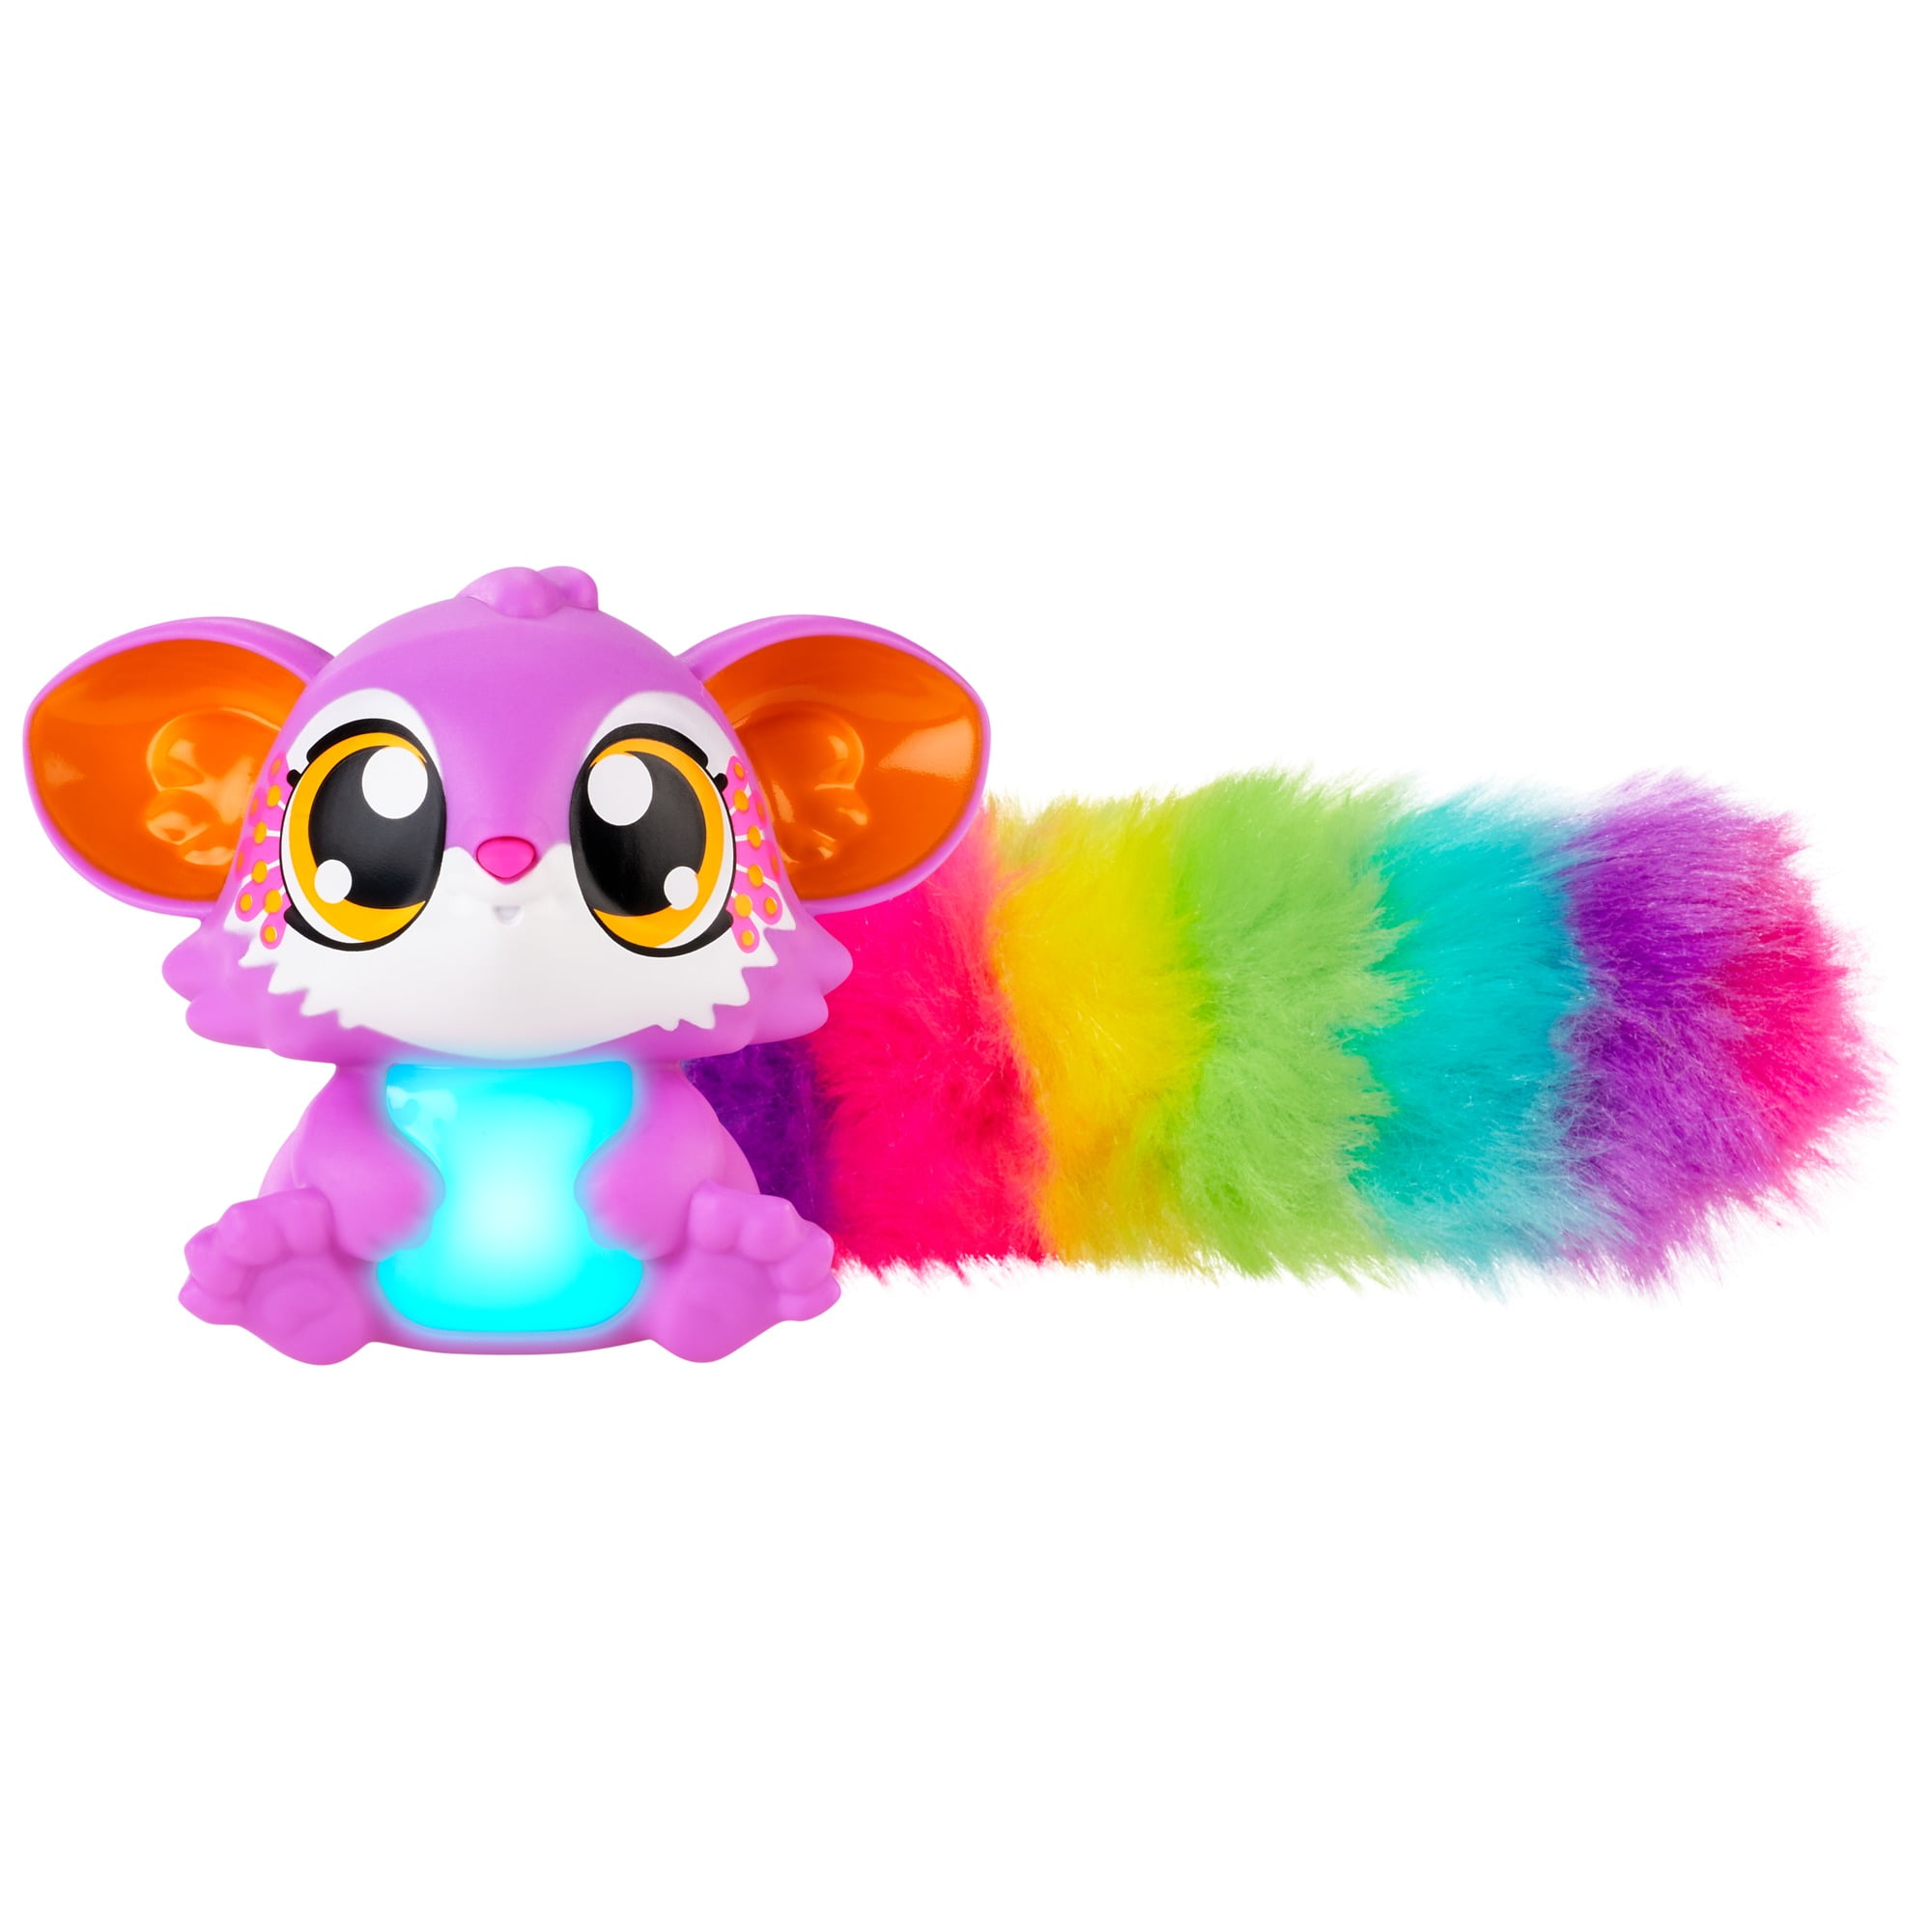 Lil' Gleemerz Babies Sounds & Light Up Tummy Mini Interactive Pet Toy with 25